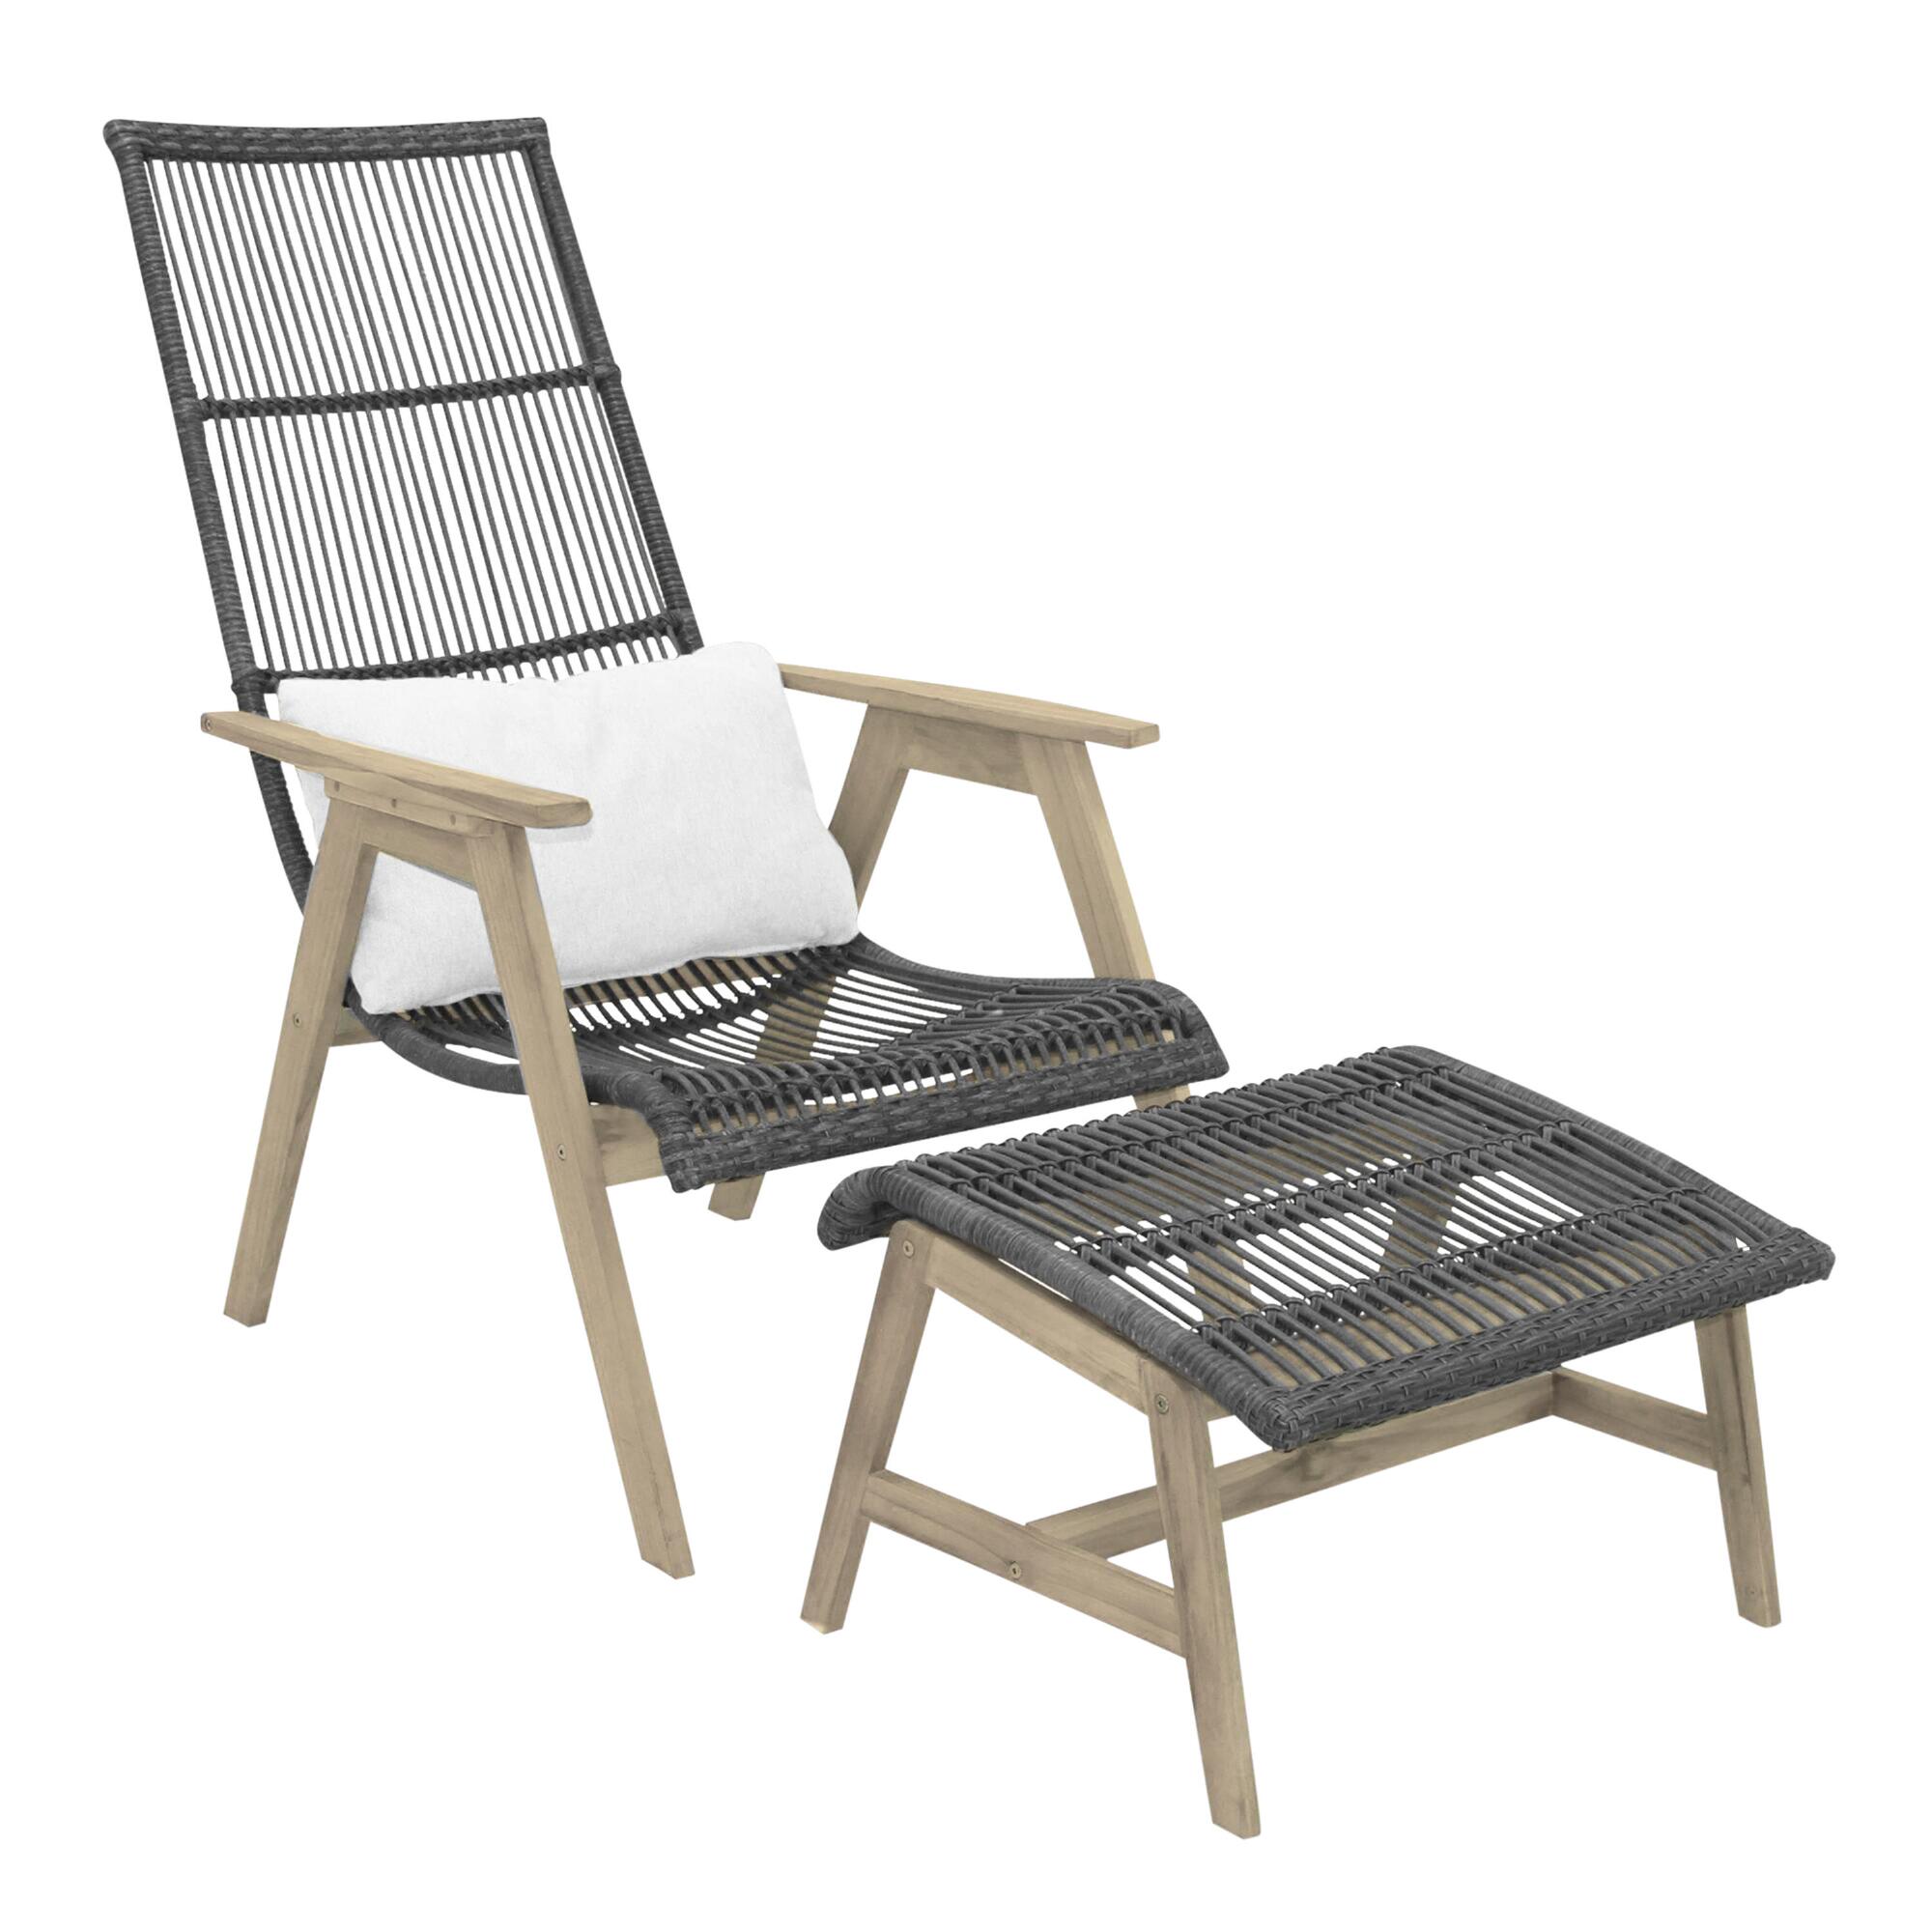 Gray All Weather and Teak Hakui Outdoor Patio Seating Collection by World Market